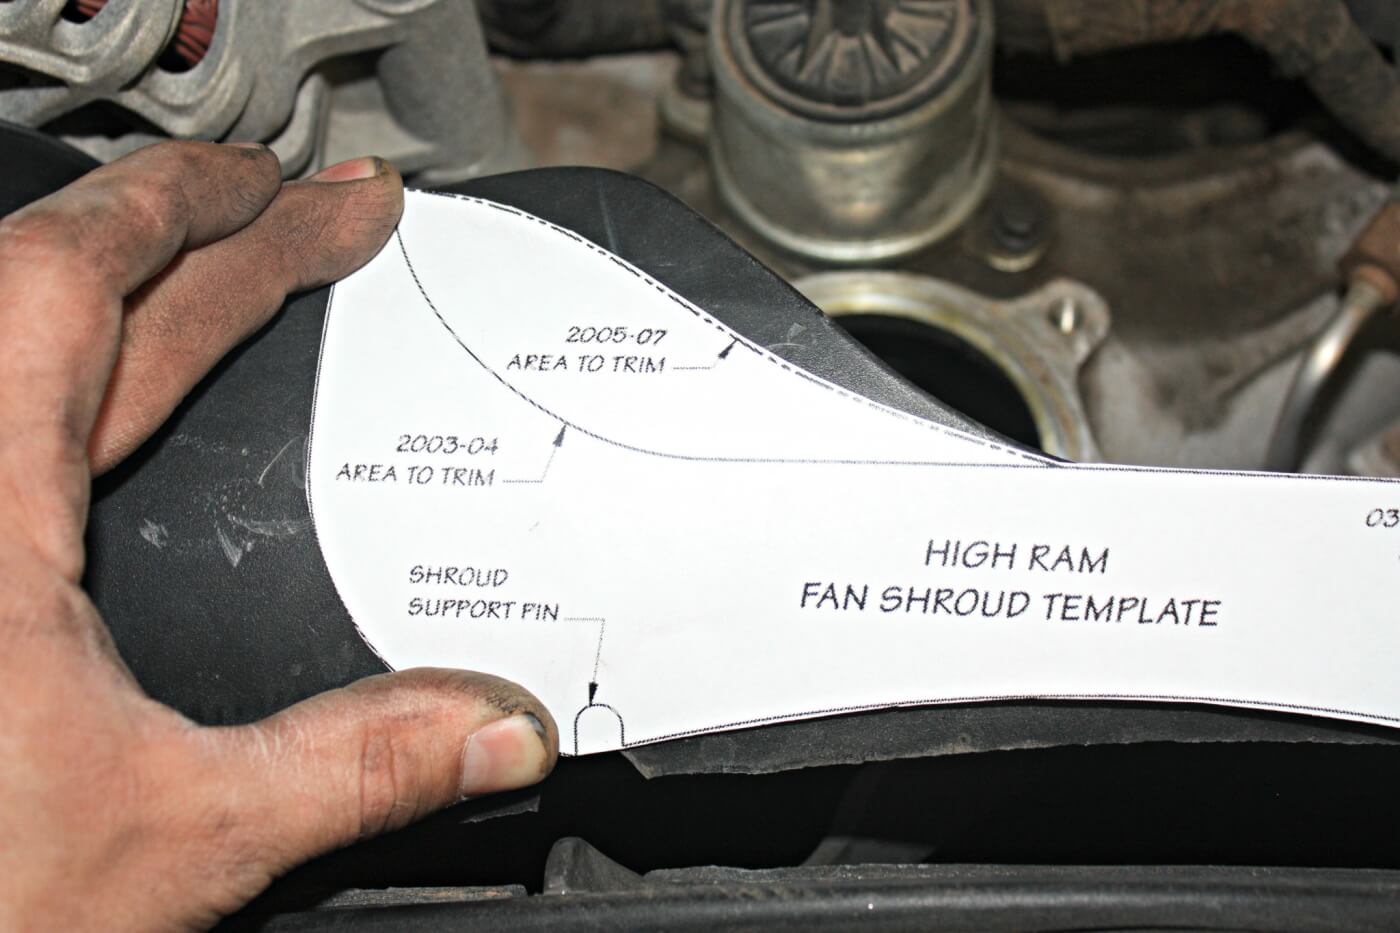 13. To make room for the larger High Ram intake elbow, the upper fan shroud plastic is going to need some minor trimming. The included template makes it easy to mark where the cuts need to be made. Just a small notch needed removed on this 2005 model. The 2003-2004 trucks will need trimmed a bit further.